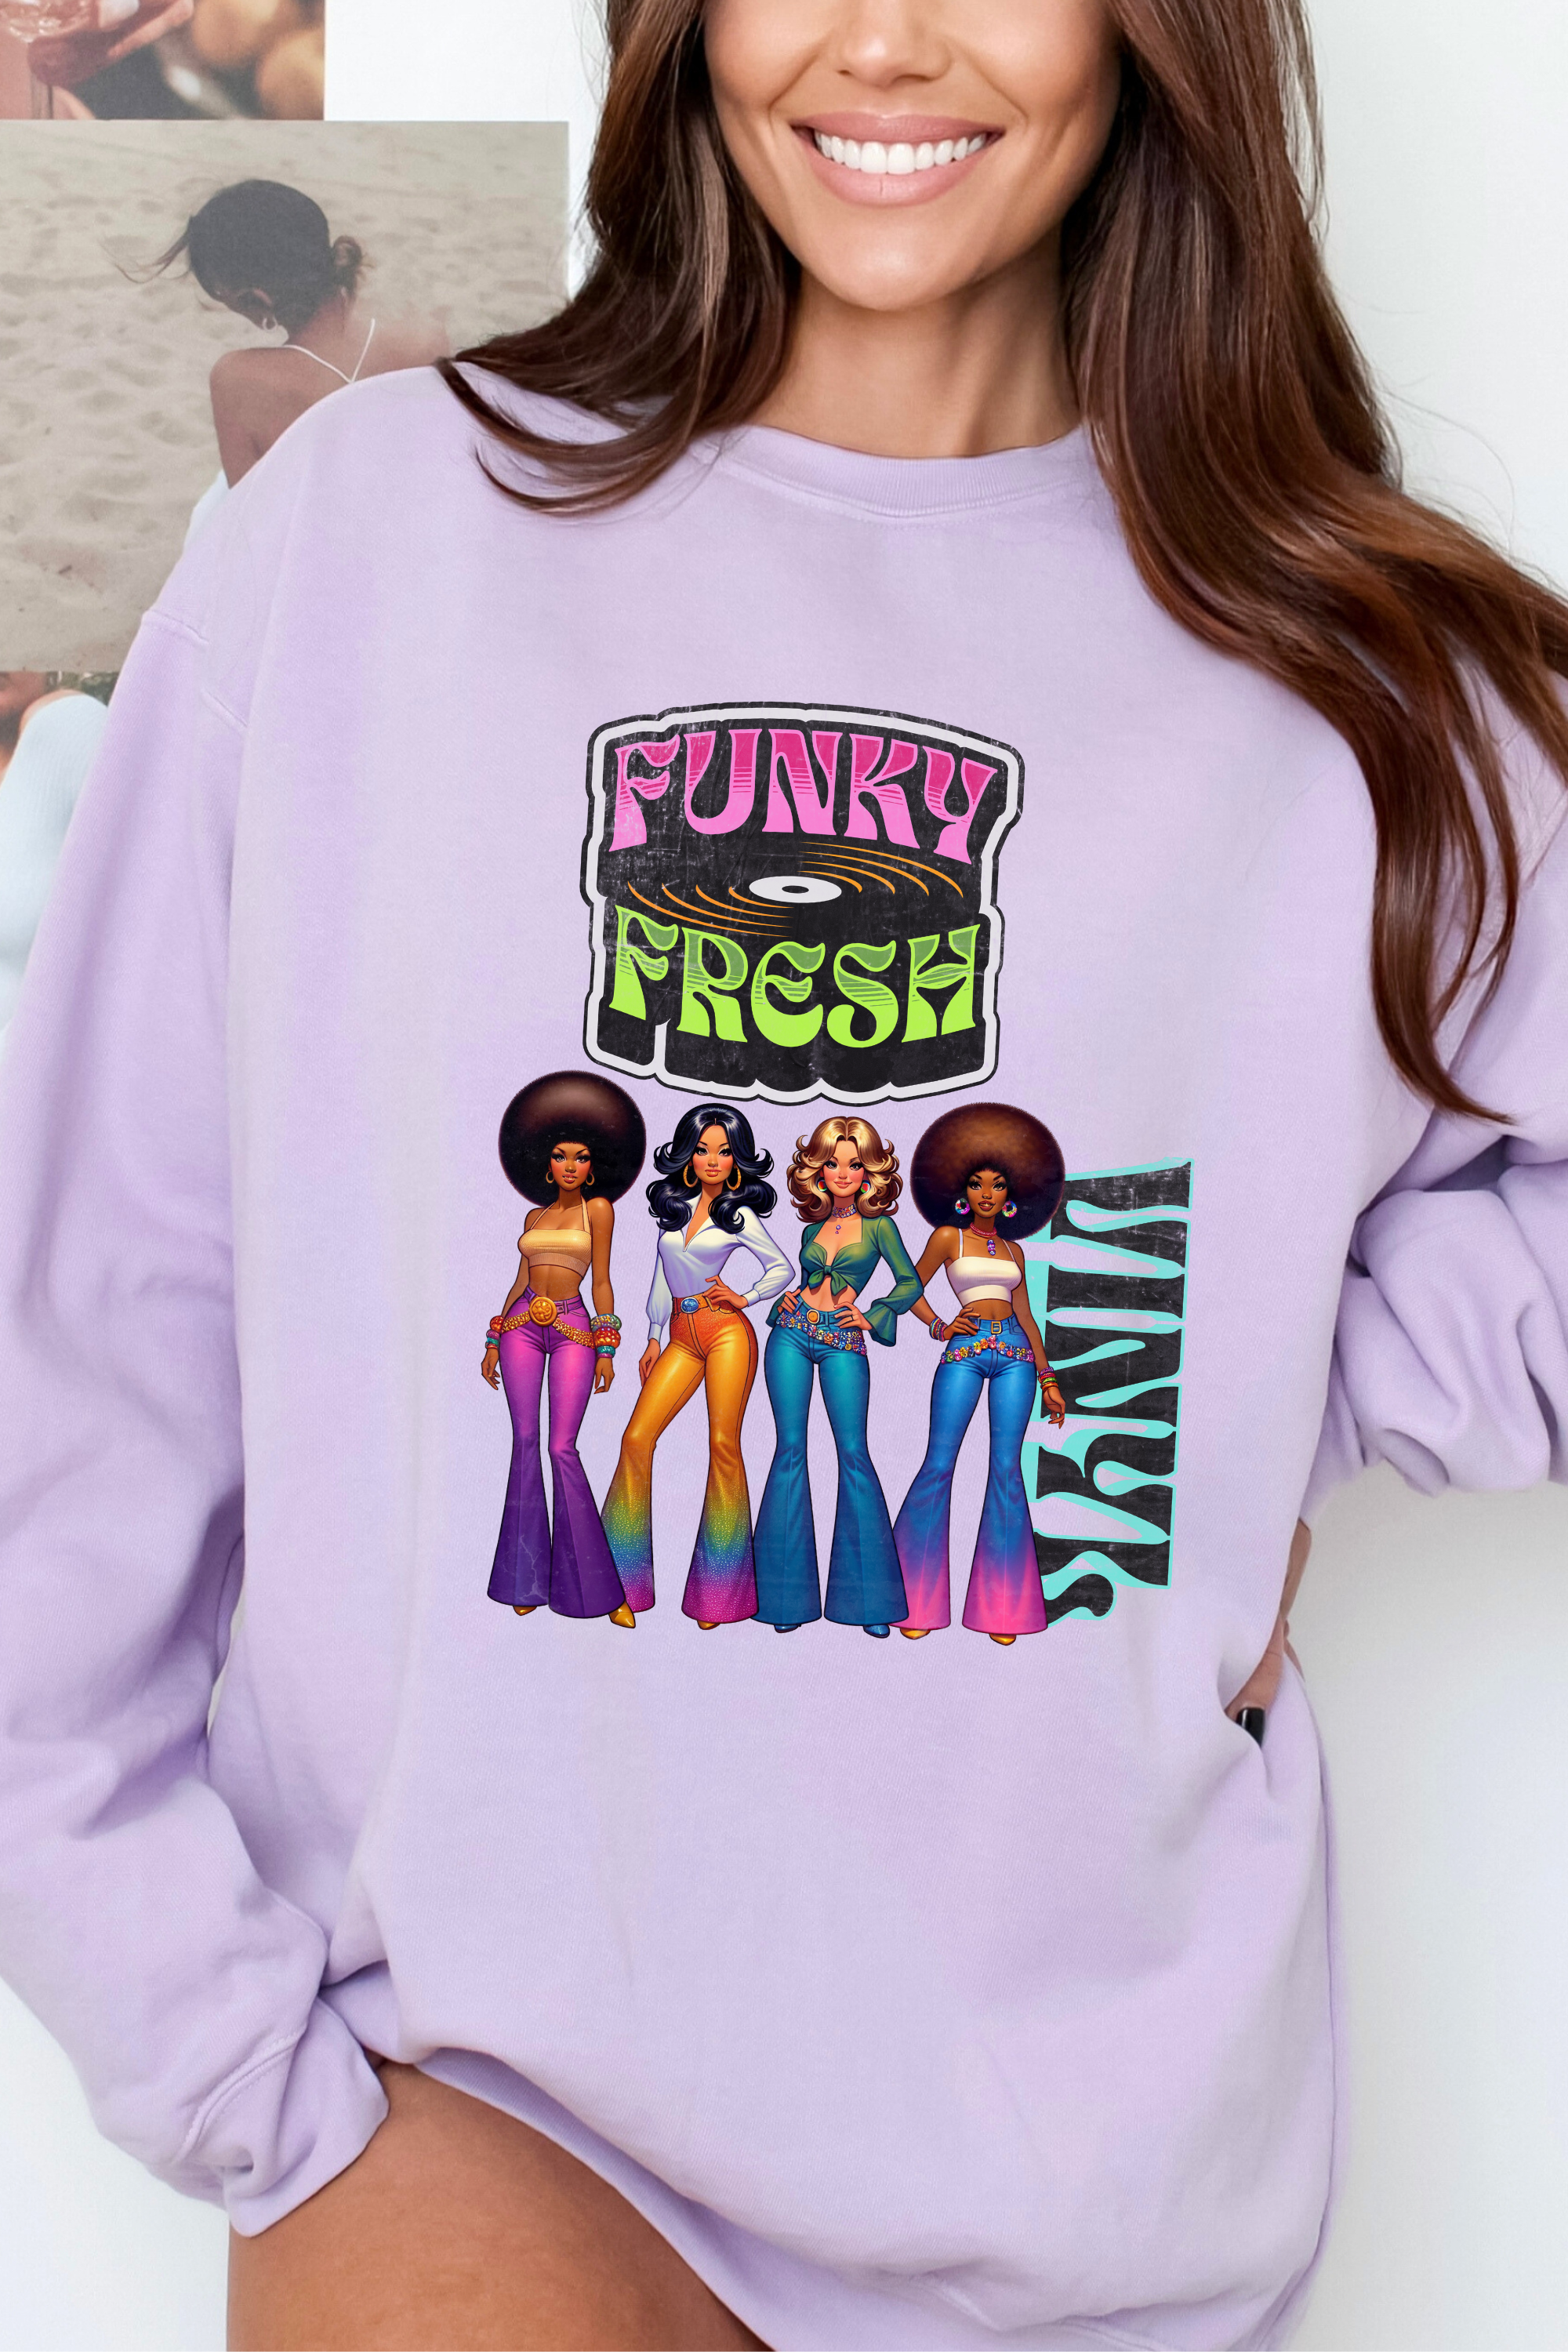 GOLDxTEAL's Colorful retro distressed graphic sweatshirt.